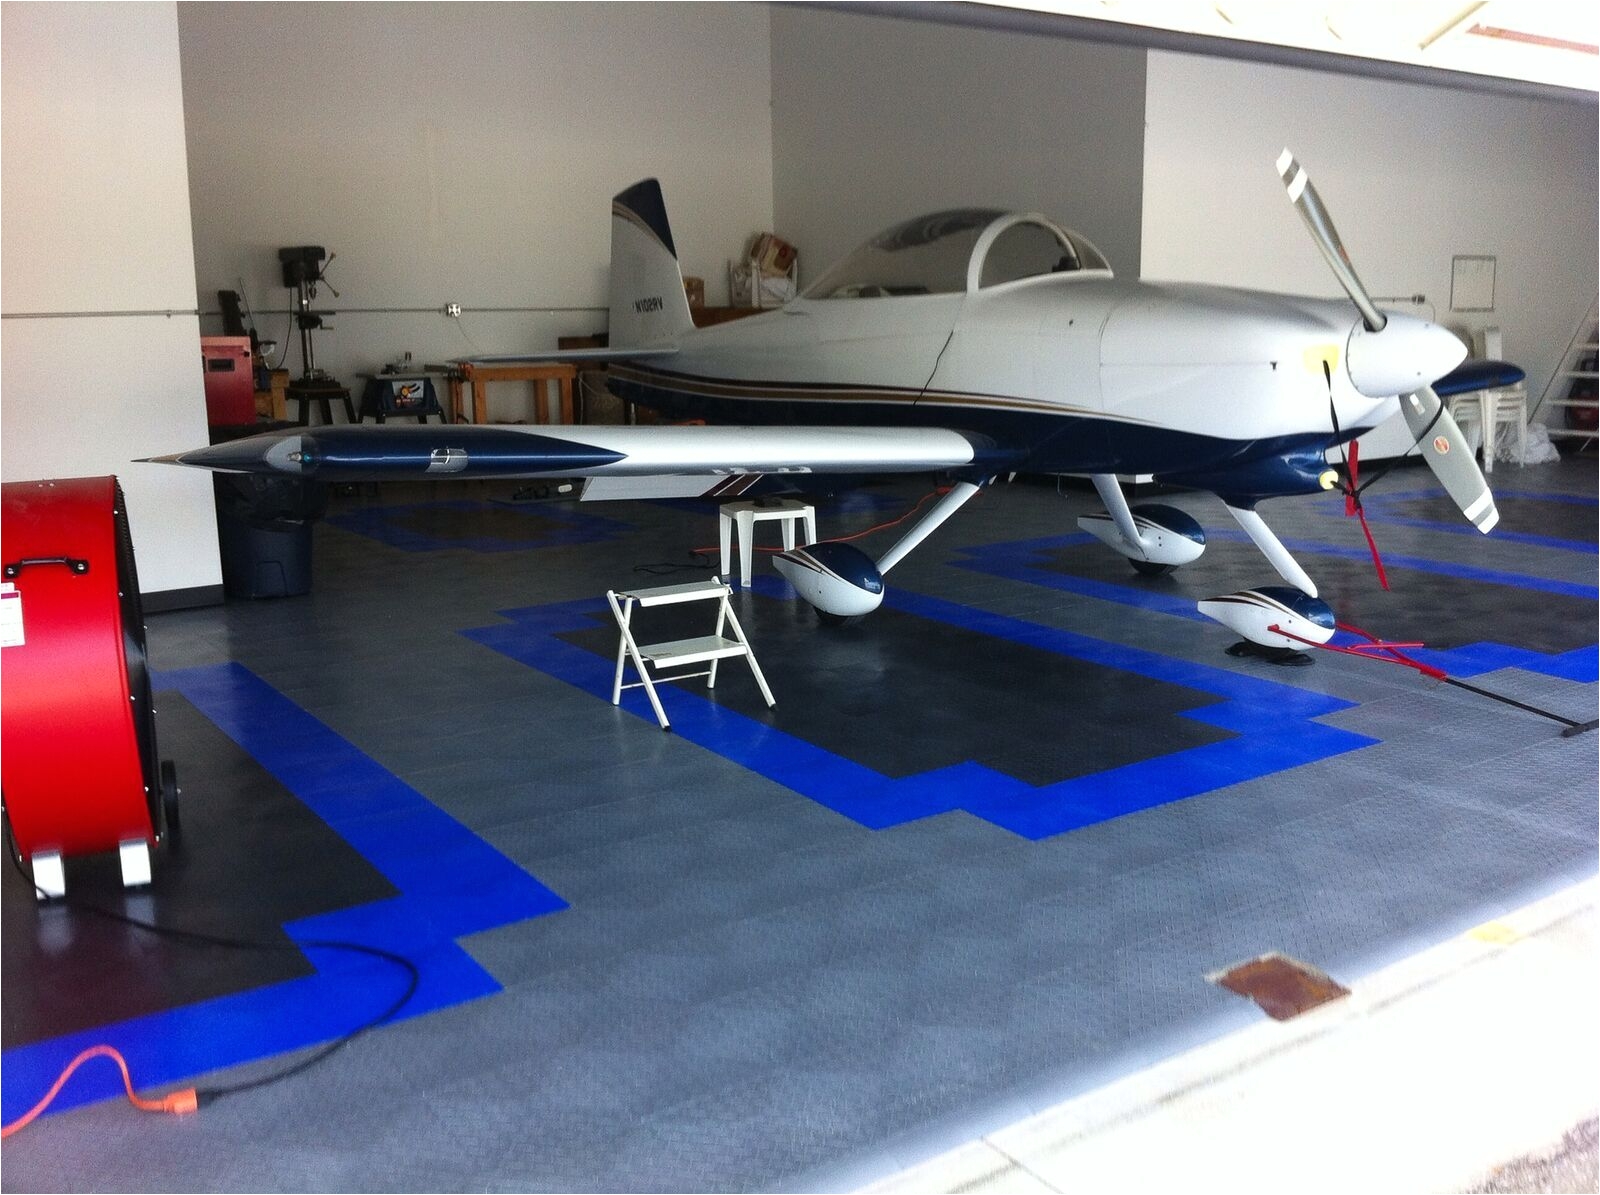 race deck diamond pattern used for airplane hanger flooring heavy duty snap together tiles